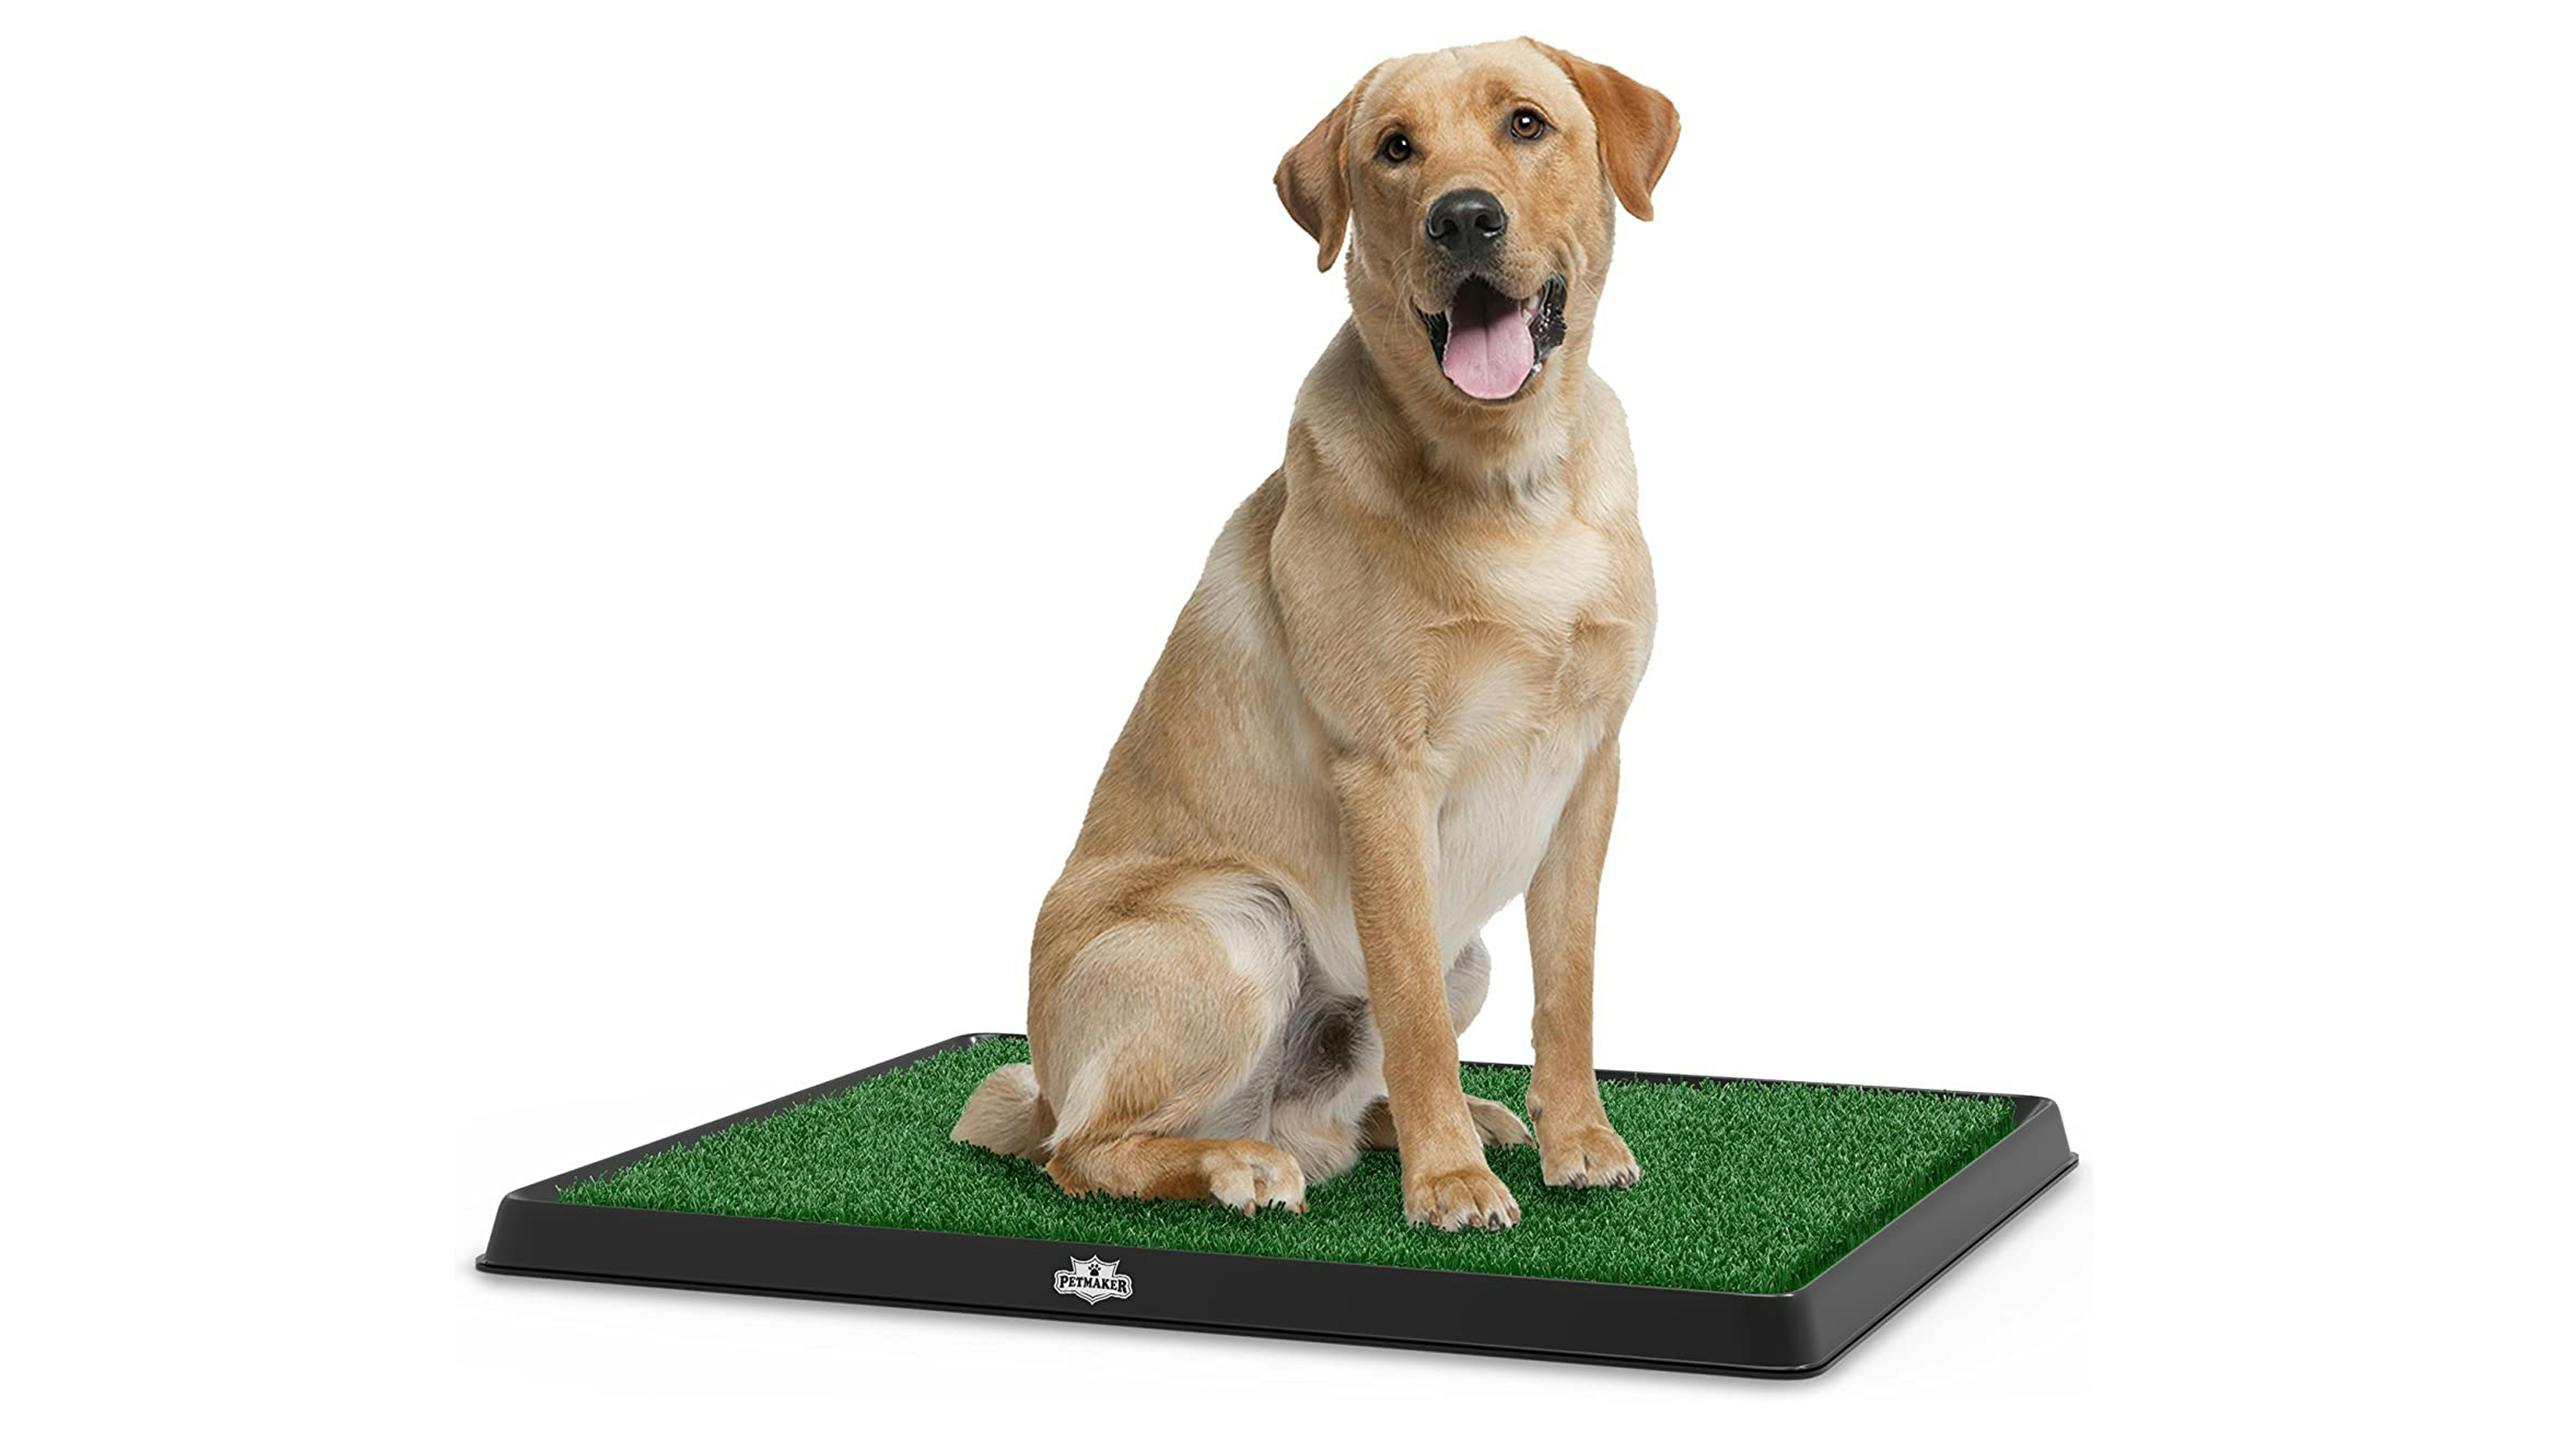 Artificial Dog Grass with a Labrador parked on it.